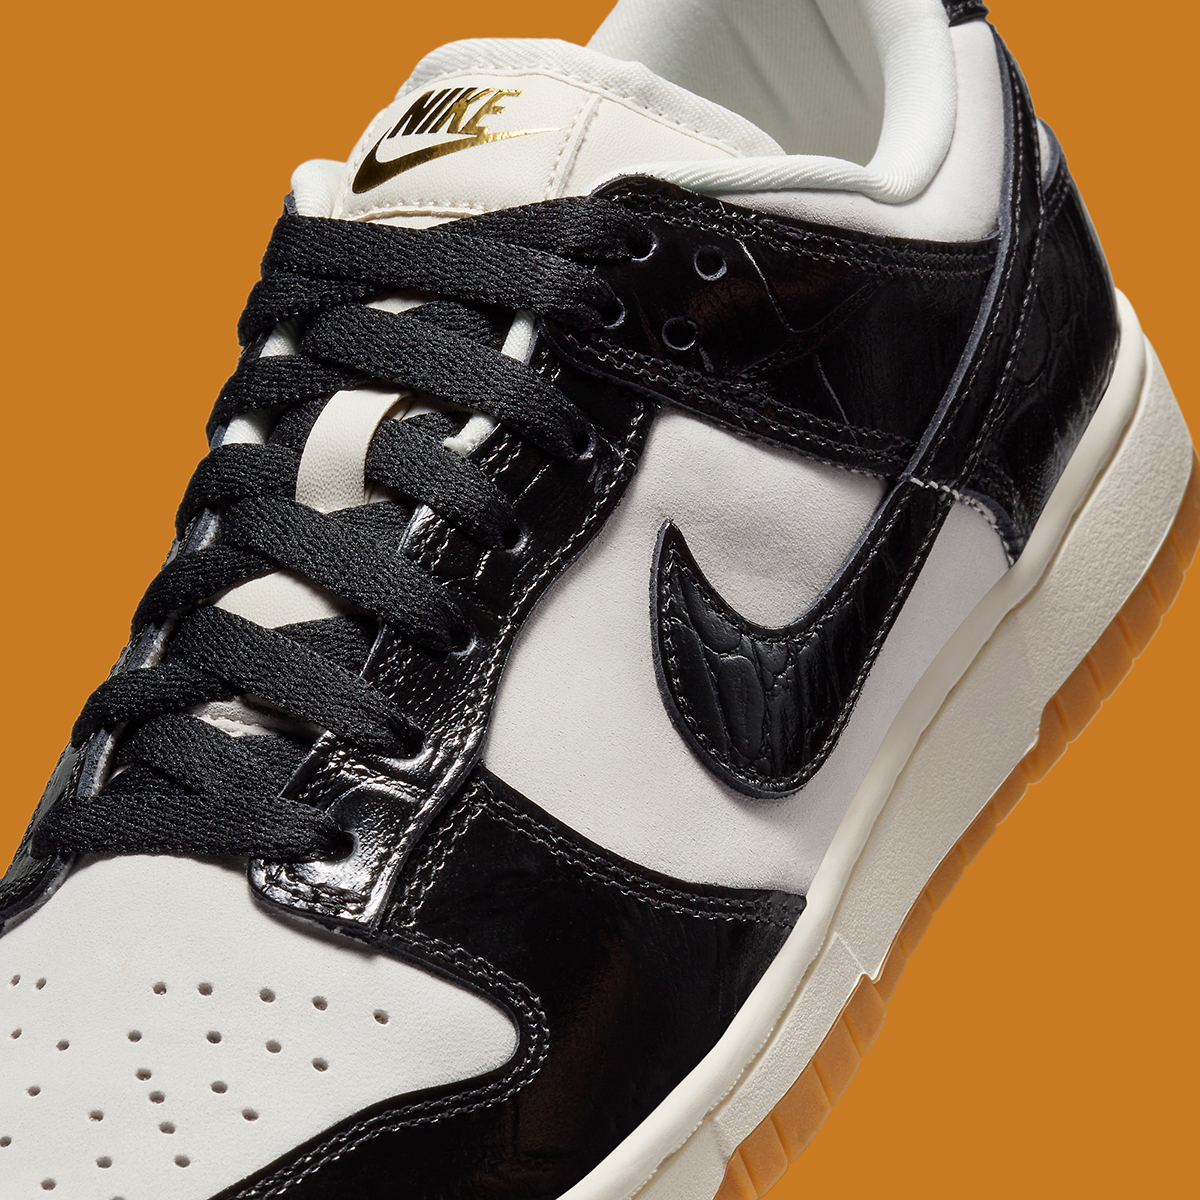 The Nike Dunk Low 'Black Croc' is essentially a super luxe 'Panda